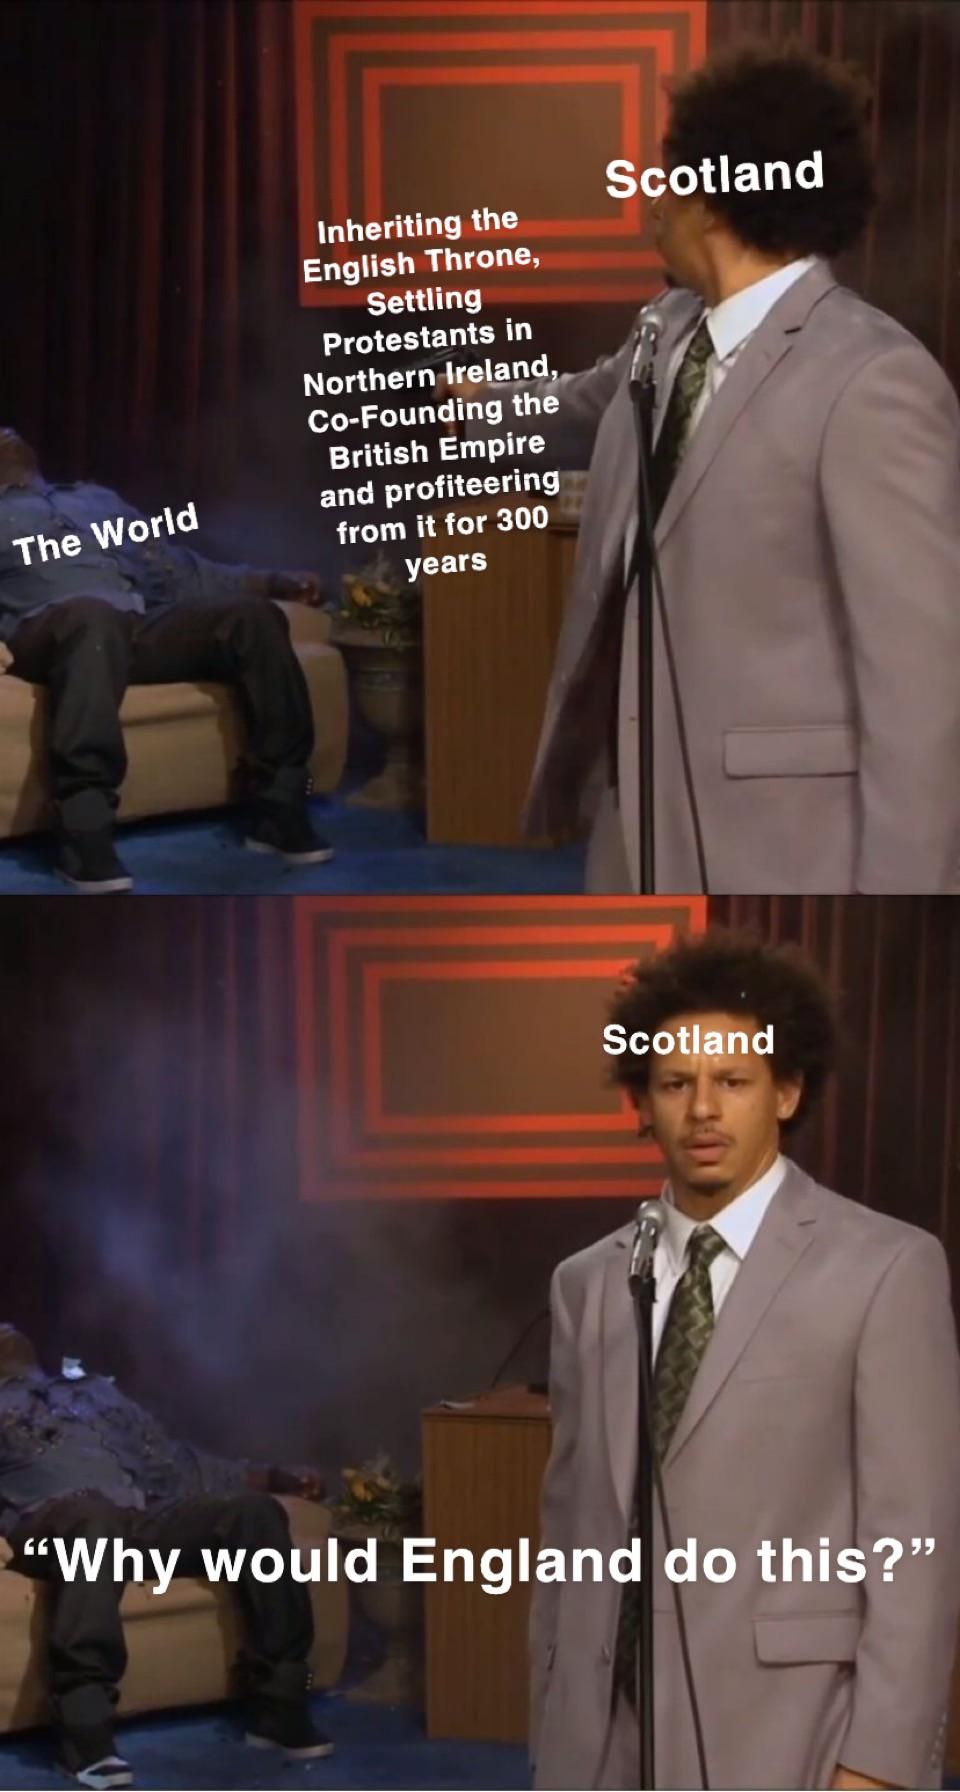 For real, Scotland has one hell of a PR team